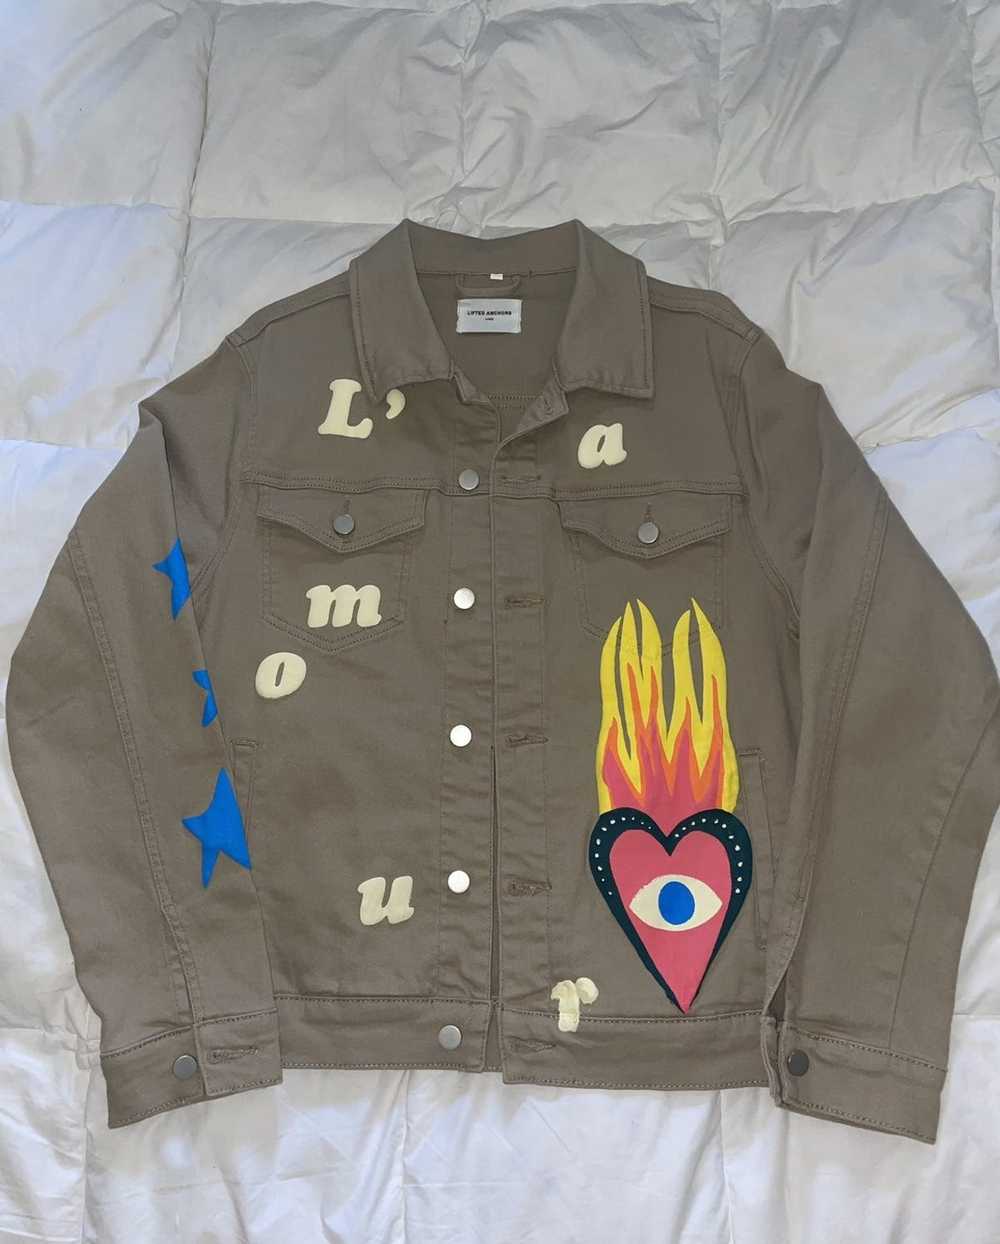 Lifted Anchors Lifted Anchors Jacket - image 1